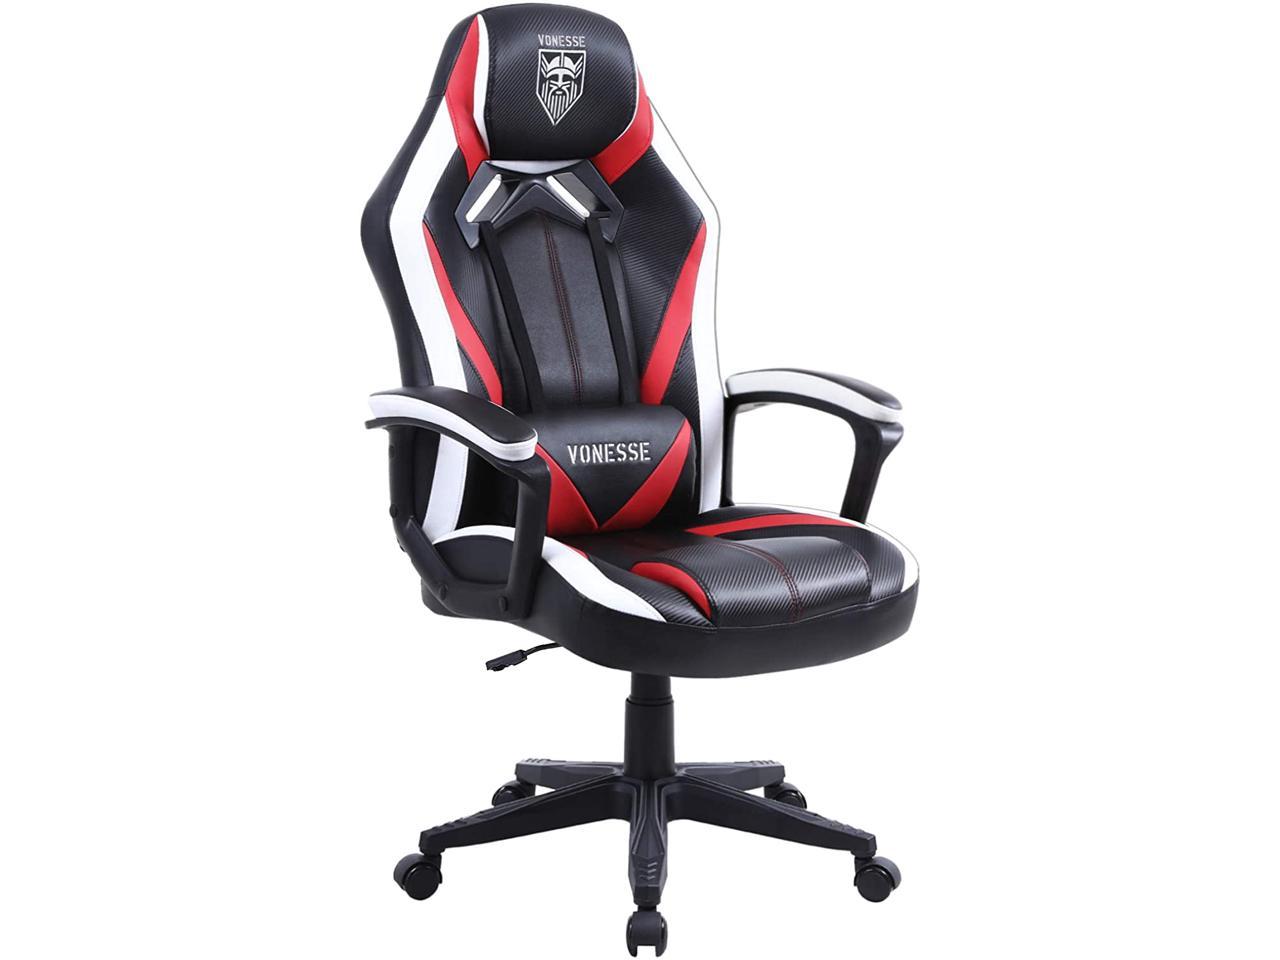 Vonesse Gaming Chairs For Teens Ergonomic Gaming Computer Chair With Massage Carbon Fiber Office Gaming Chair Computer Chair Big And Tall Heavy Duty Gamer Chair For Adults Gaming Desk Chair Newegg Com